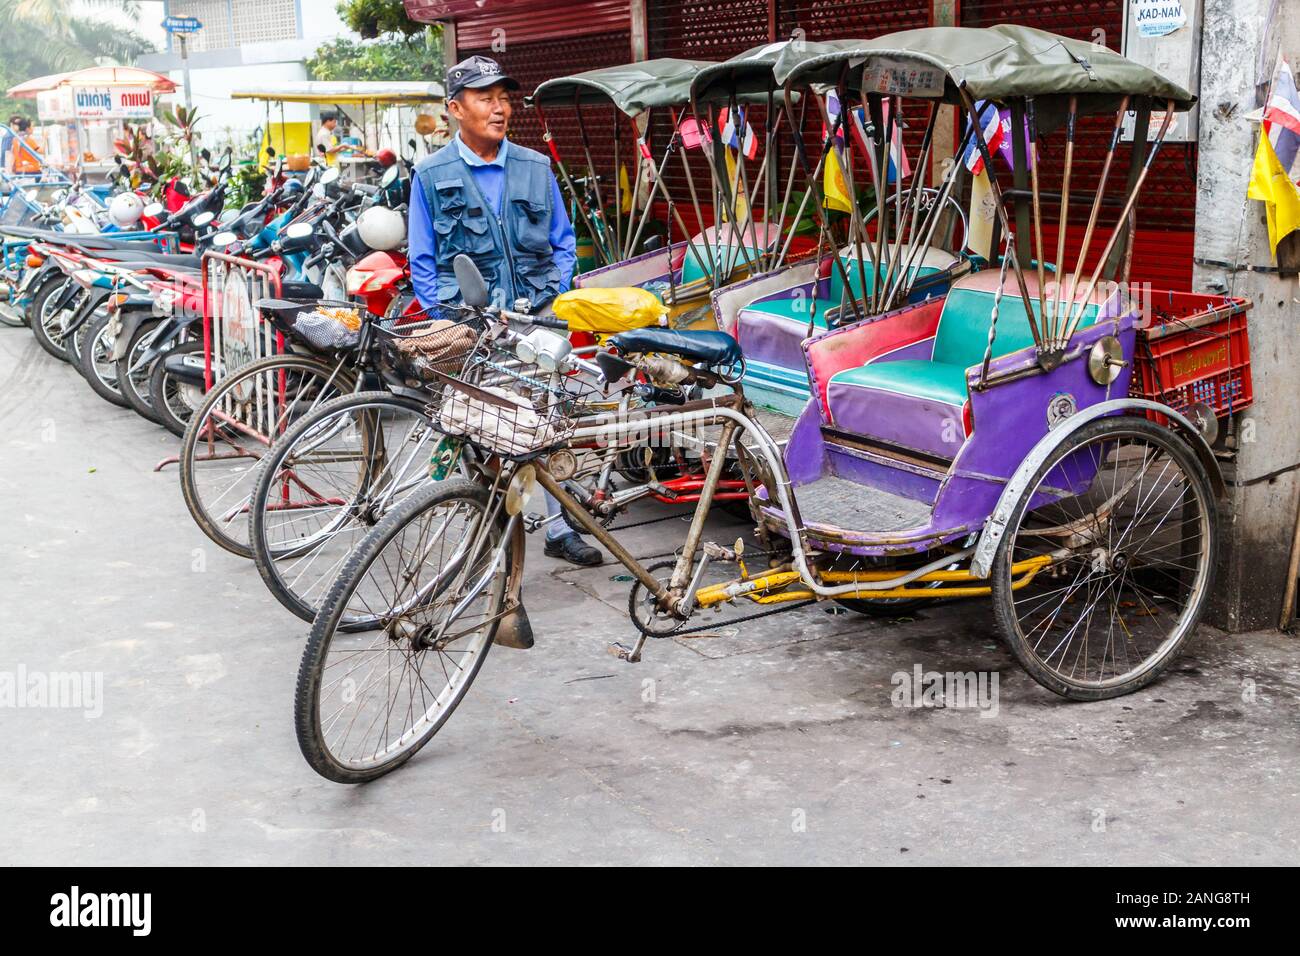 Nan, Thailand - December 16th 2014: Rickshaw drivers waiting for business, This form of transport is still used in remote areas, Stock Photo